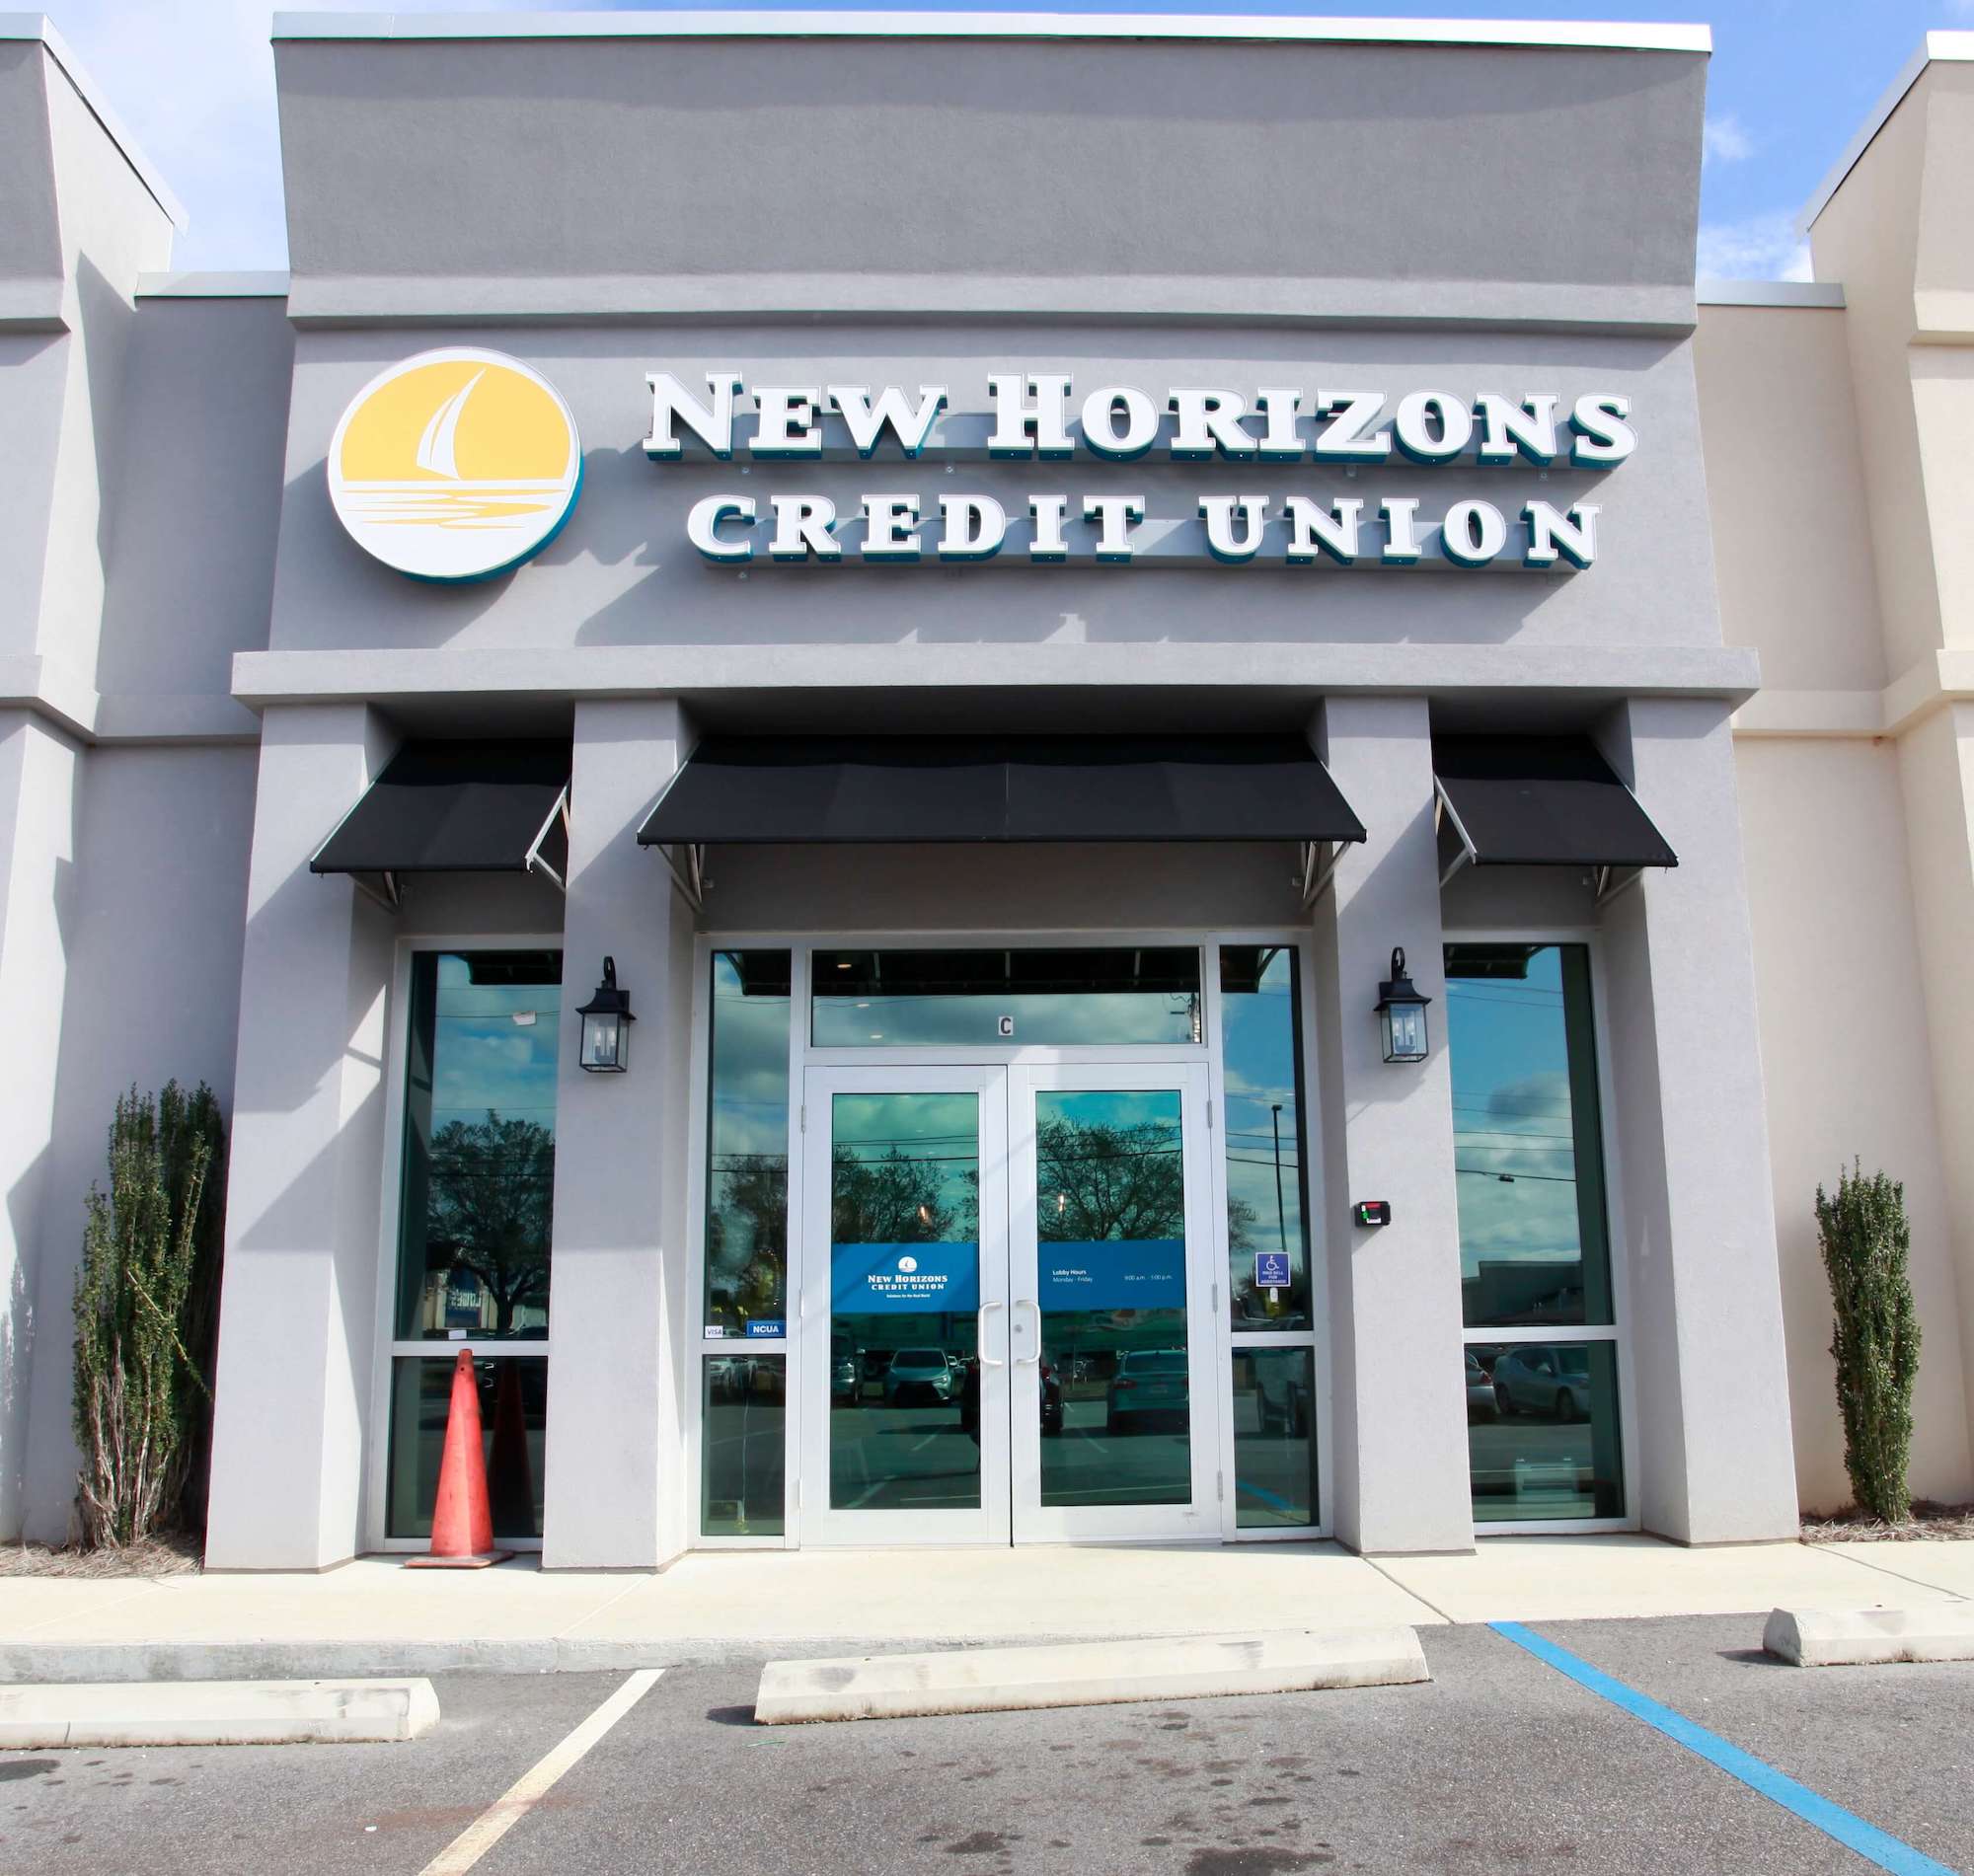 The exterior of a credit union storefront with light gray pillars, black window awnings, and three-dimensional signage reading “New Horizons Credit Union” in white, uppercase letters.